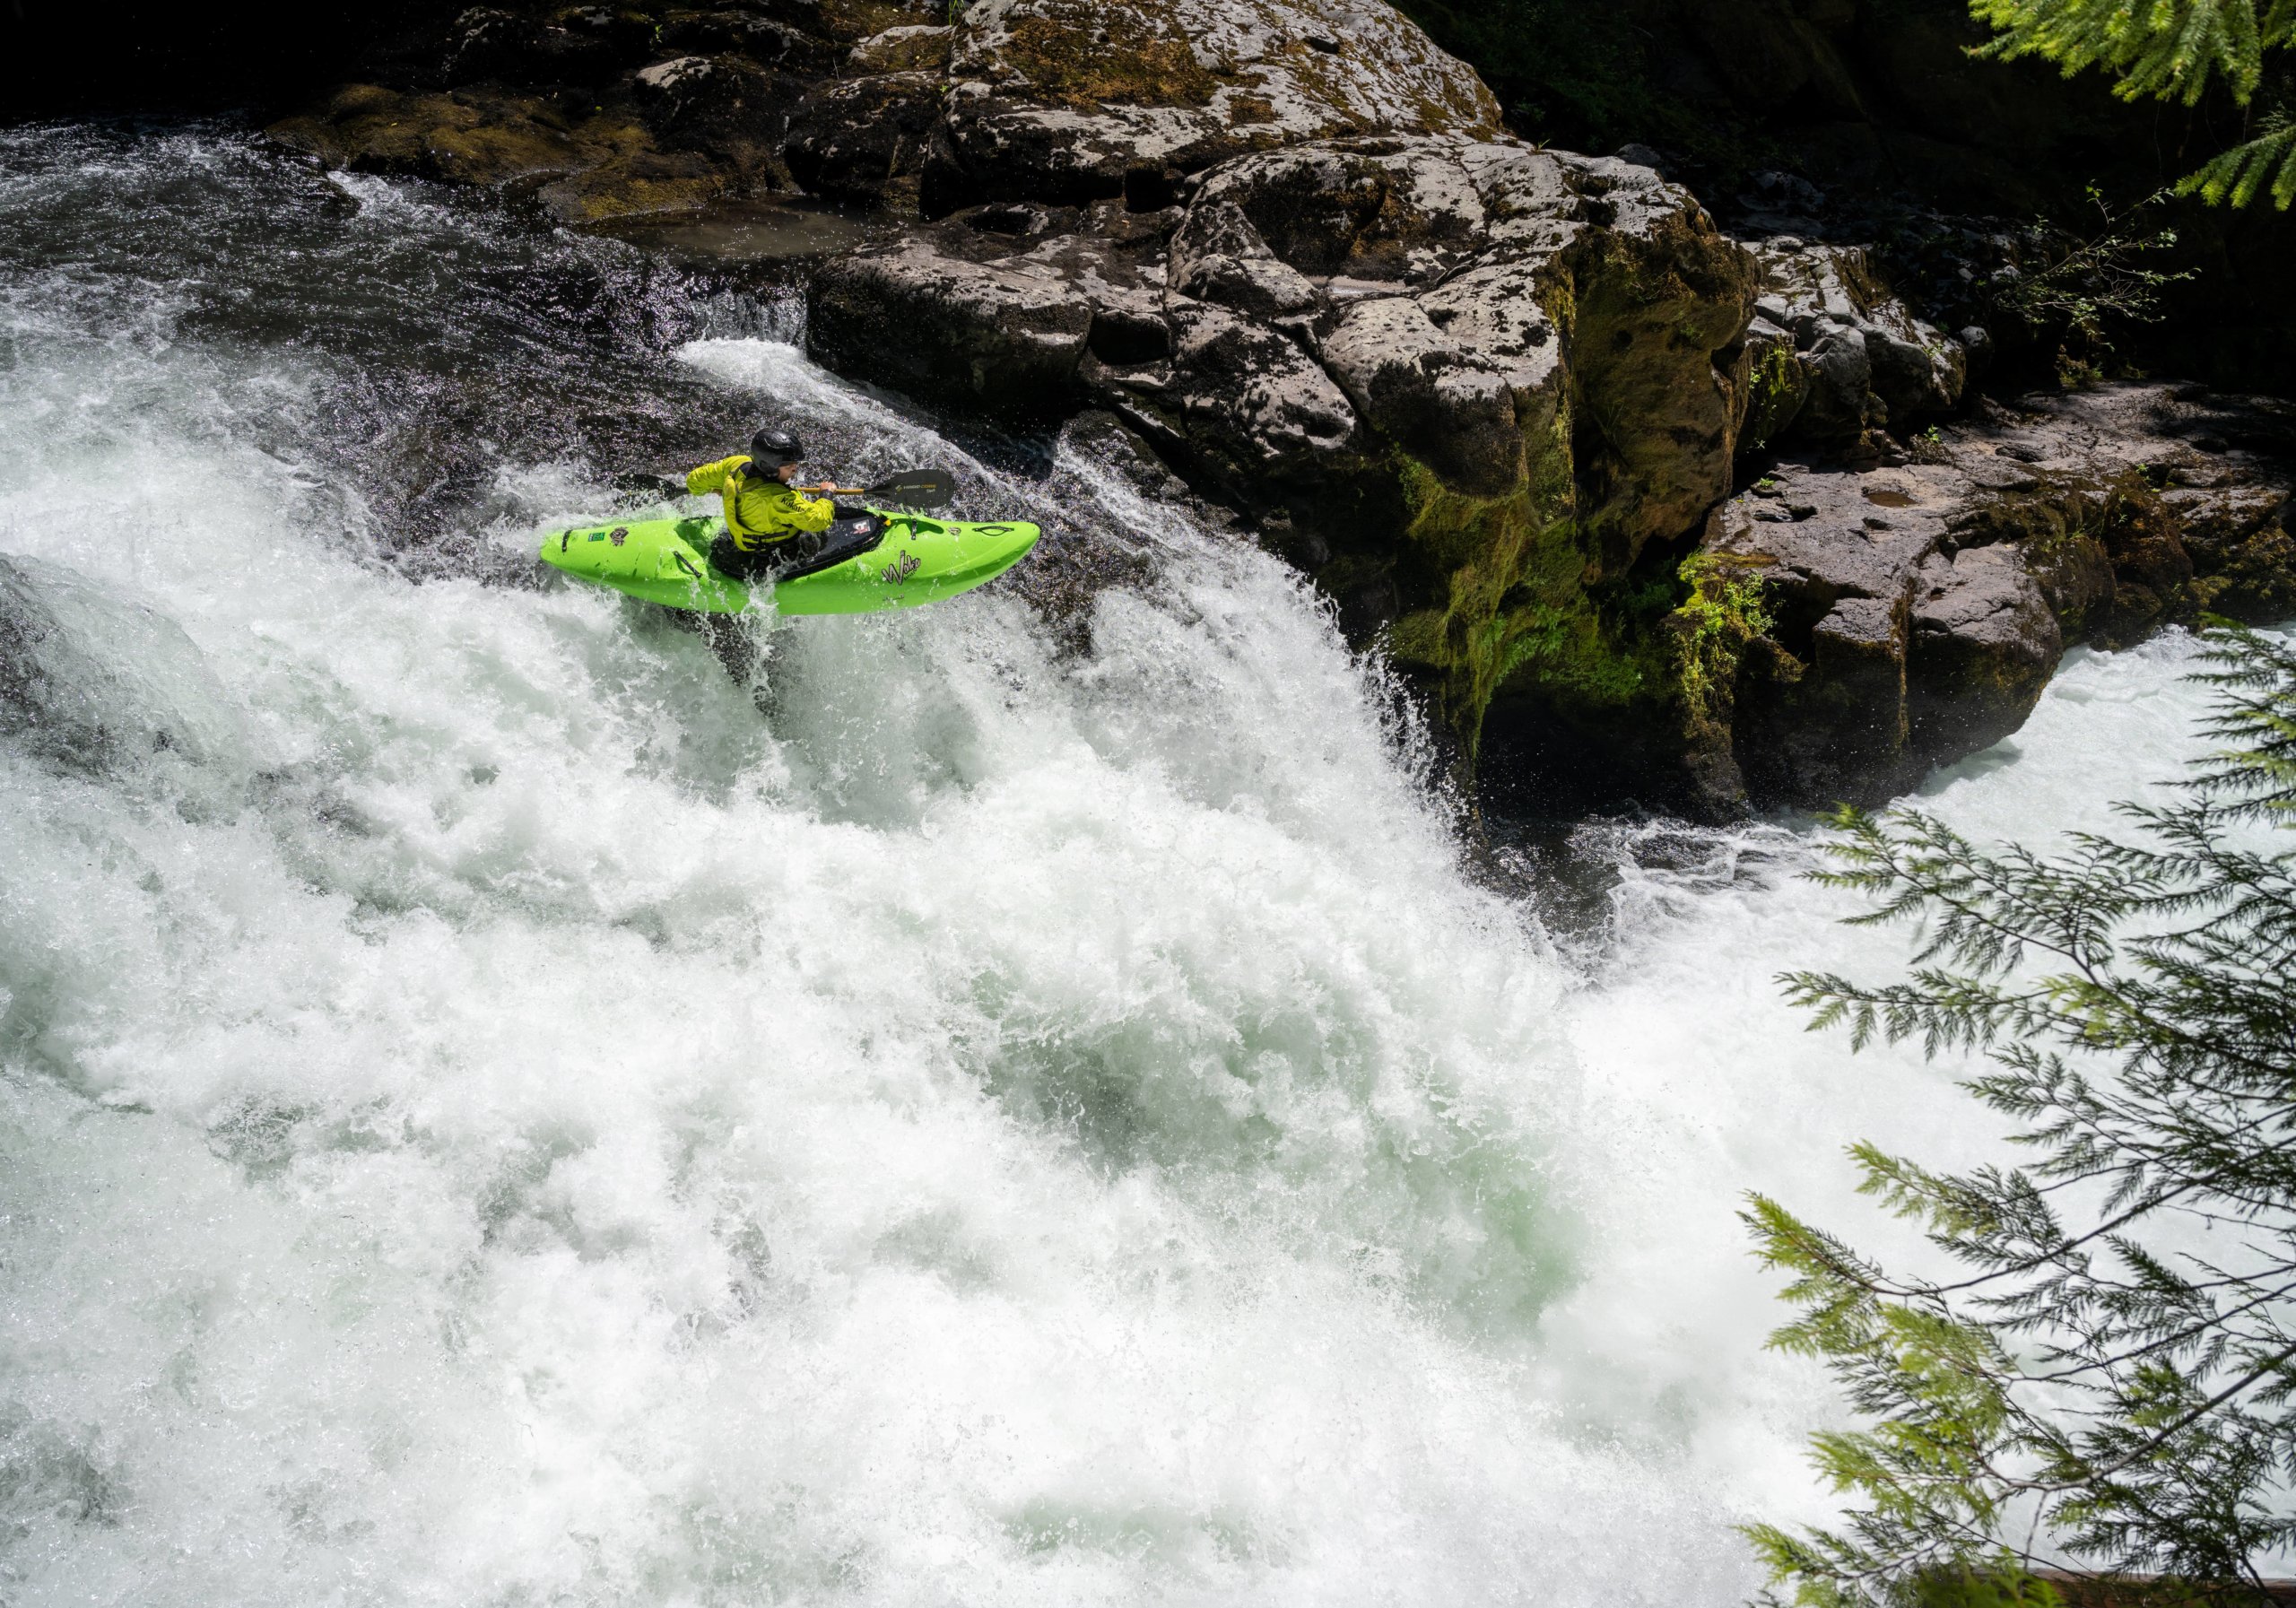 Natalie Anderson kayaking off a waterfall